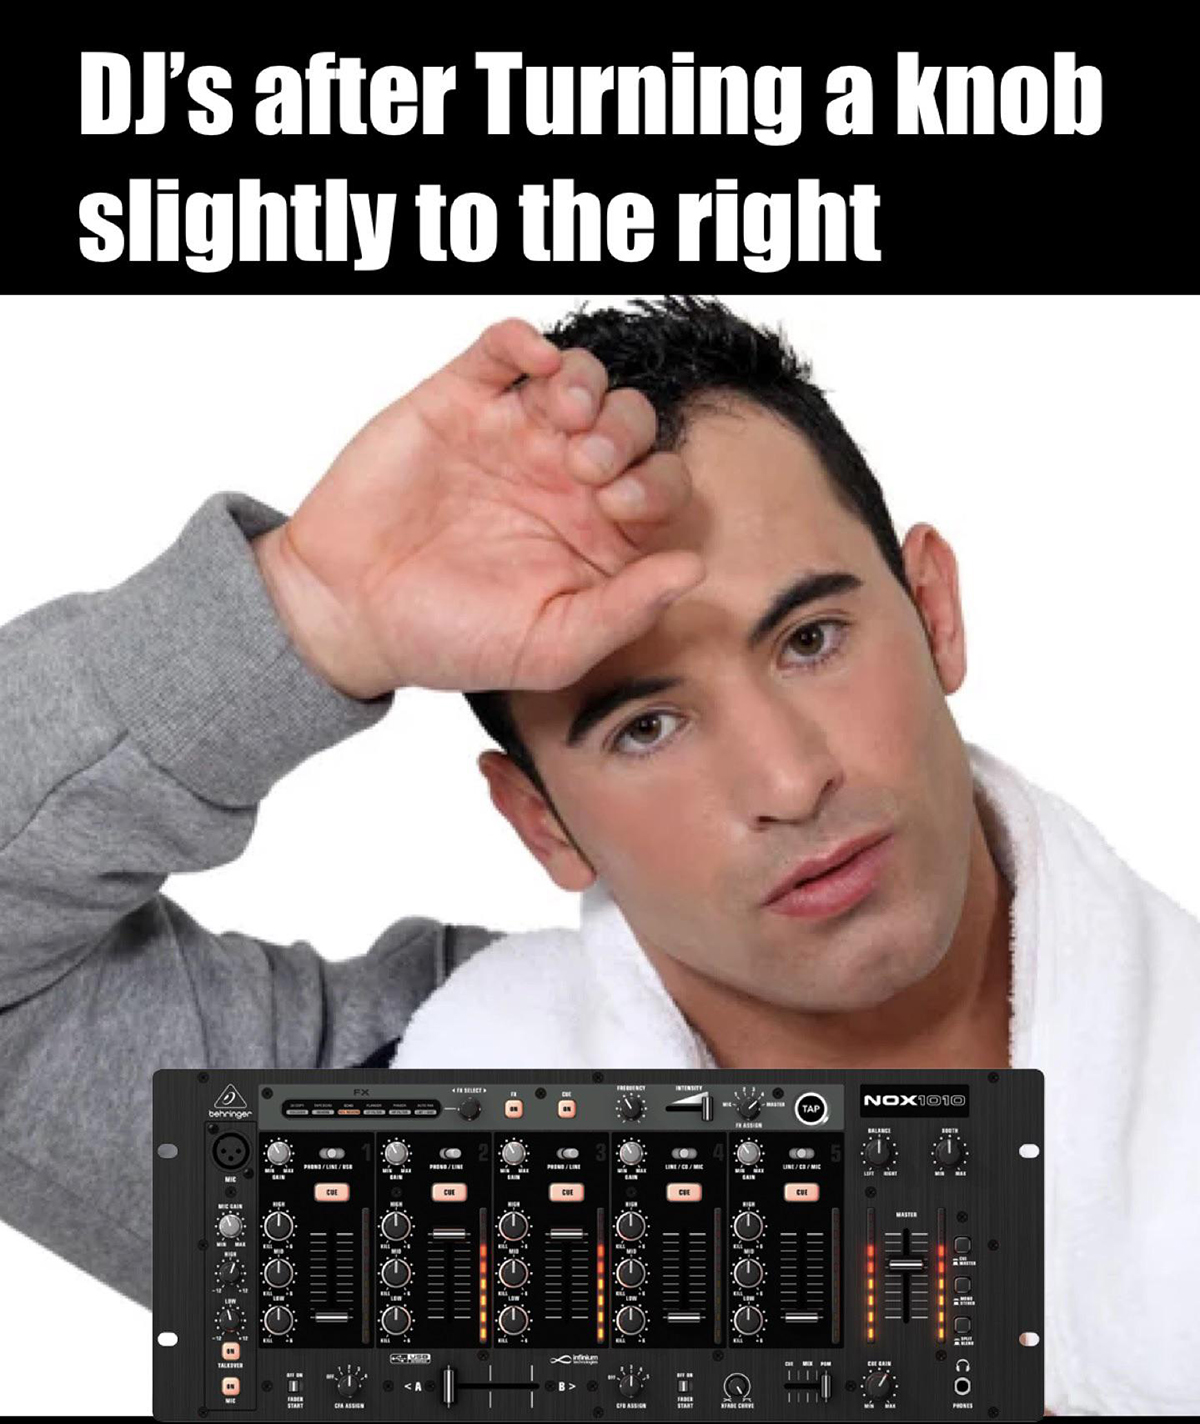 dank memes - photo caption - Dj's after Turning a knob slightly to the right Nox F of tot col 1 elete t De 1 111 12 000 1 D! 1 1009 101 13 18 0 0.